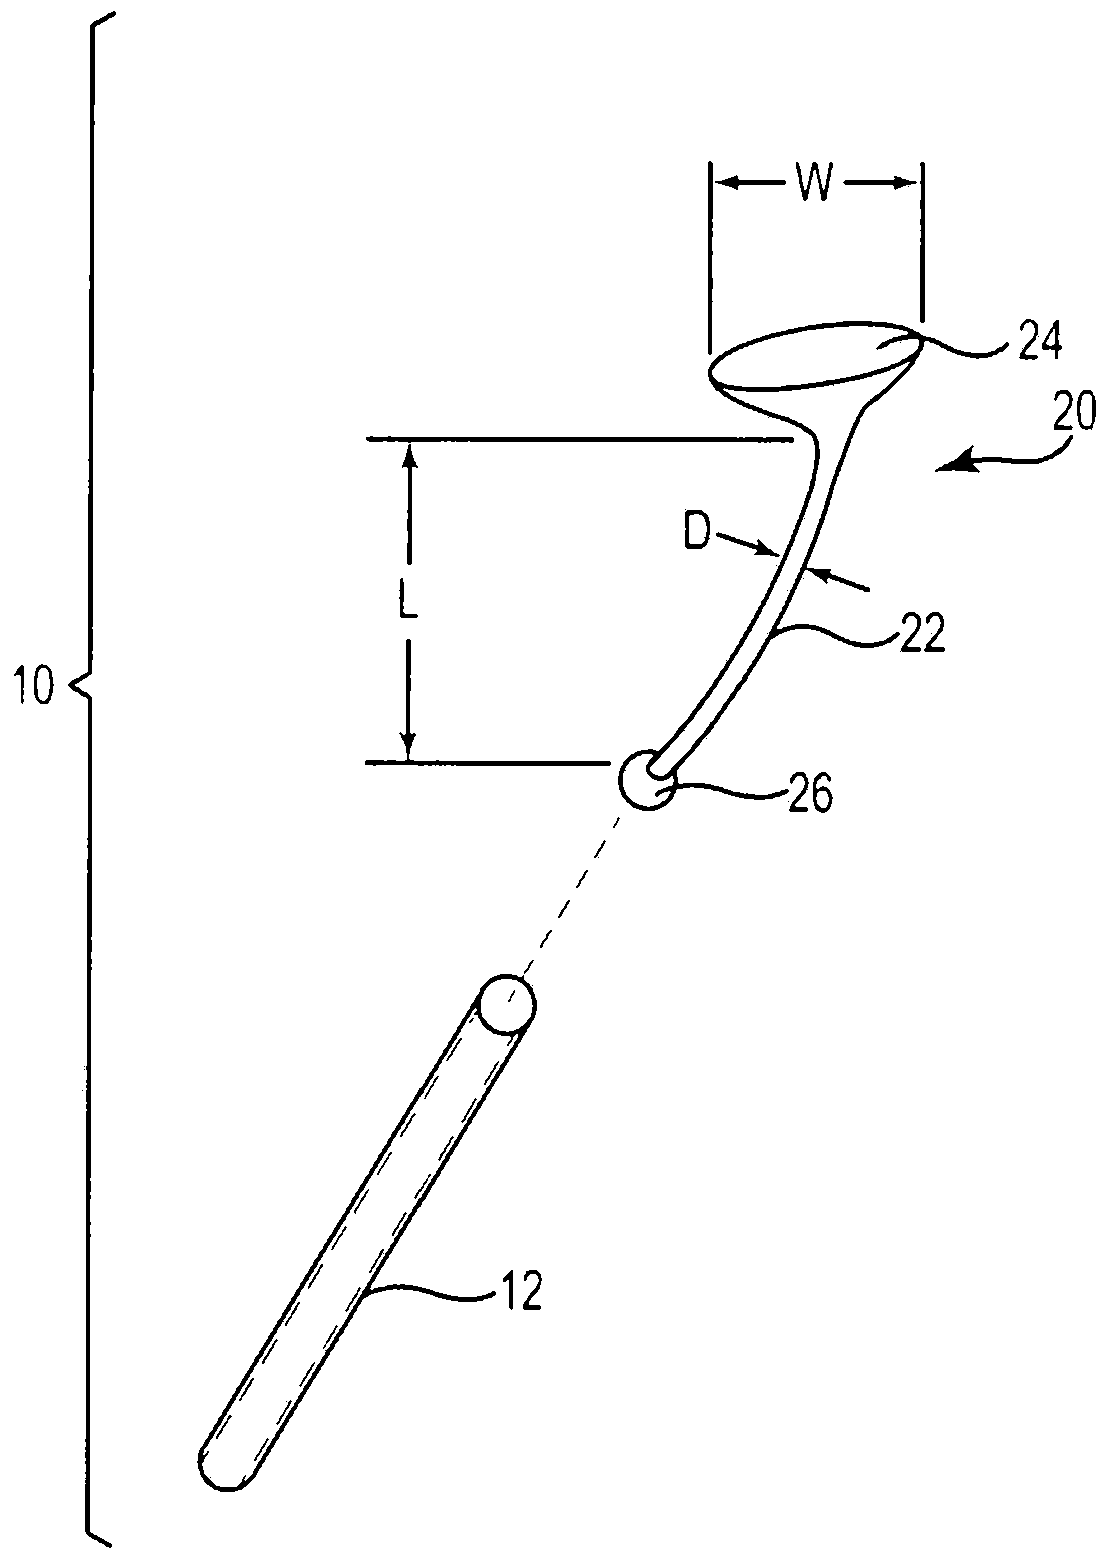 Incontinence treatment device configured for urethral placement into the bladder